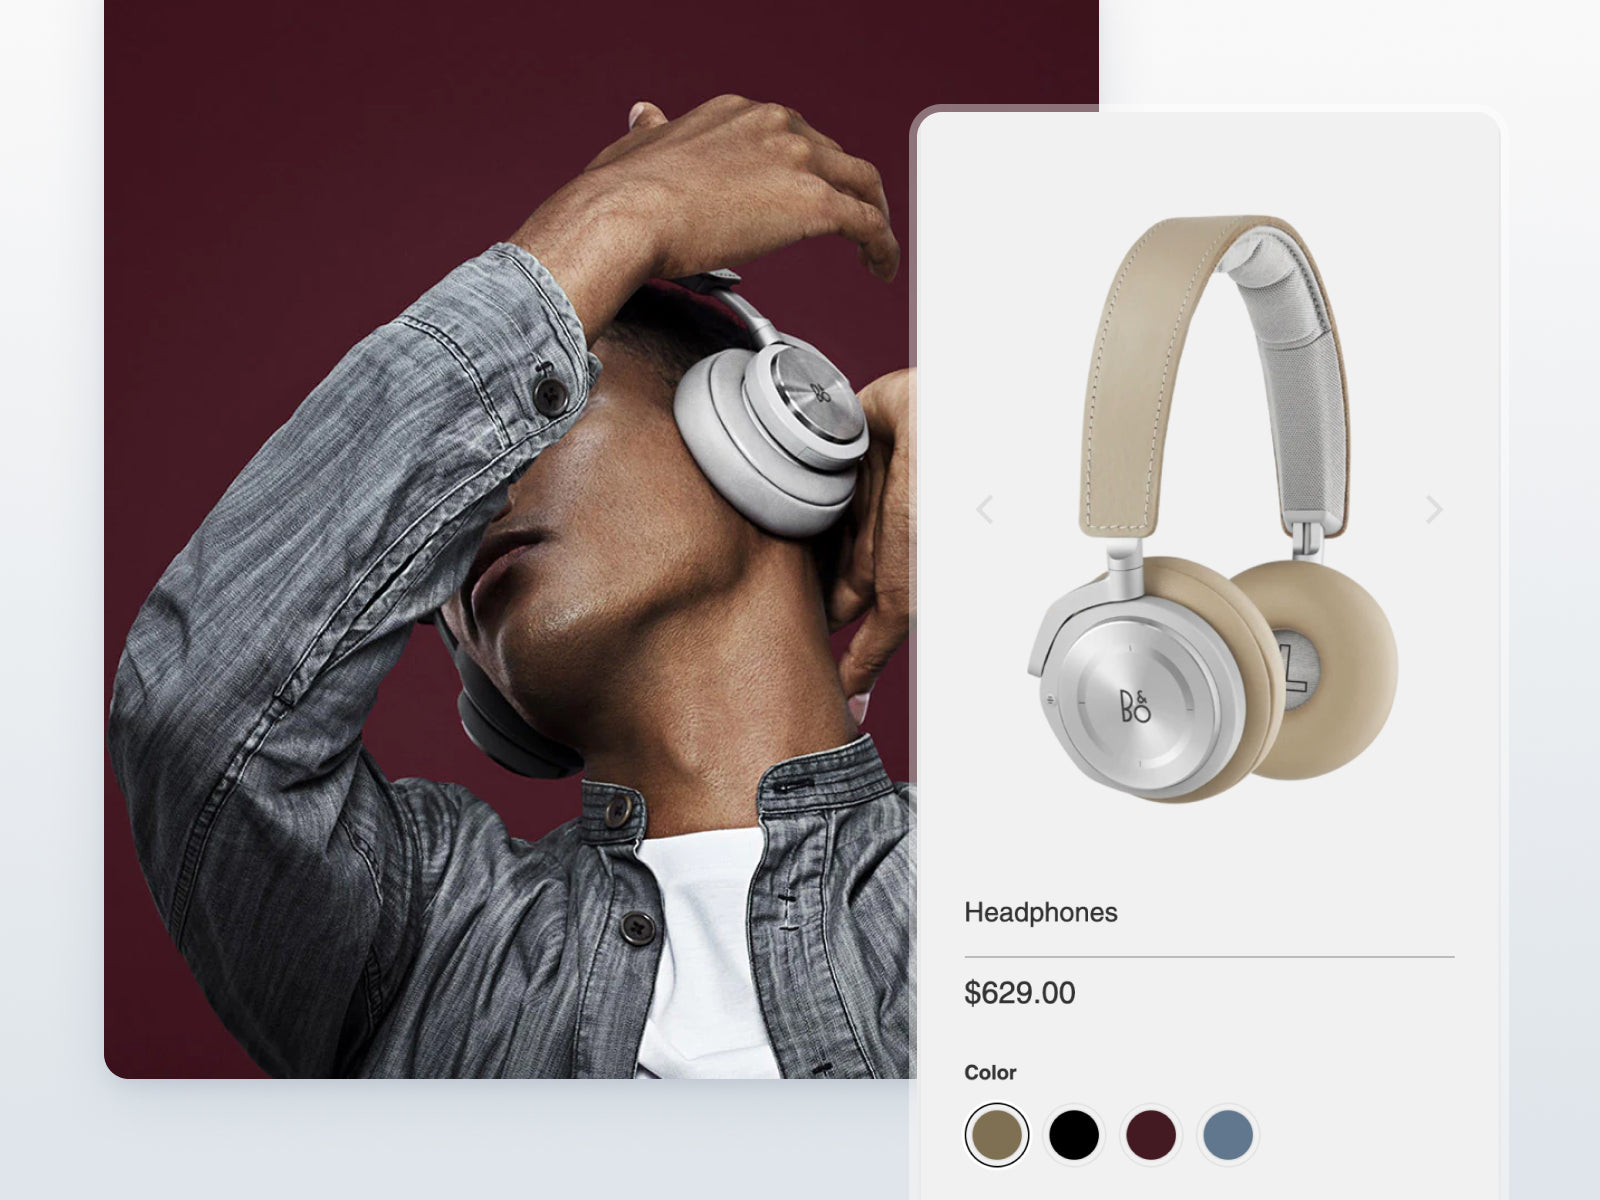 Screenshot of Turbo Shopify theme by Out of the Sandbox. Screenshot shows online store product page showcasing wireless, over-ear headphones, and 4 colour swatches. Behind the screenshot is an image of a person wearing wireless, over-ear headphones with their hand in front of their face in front of a maroon background.